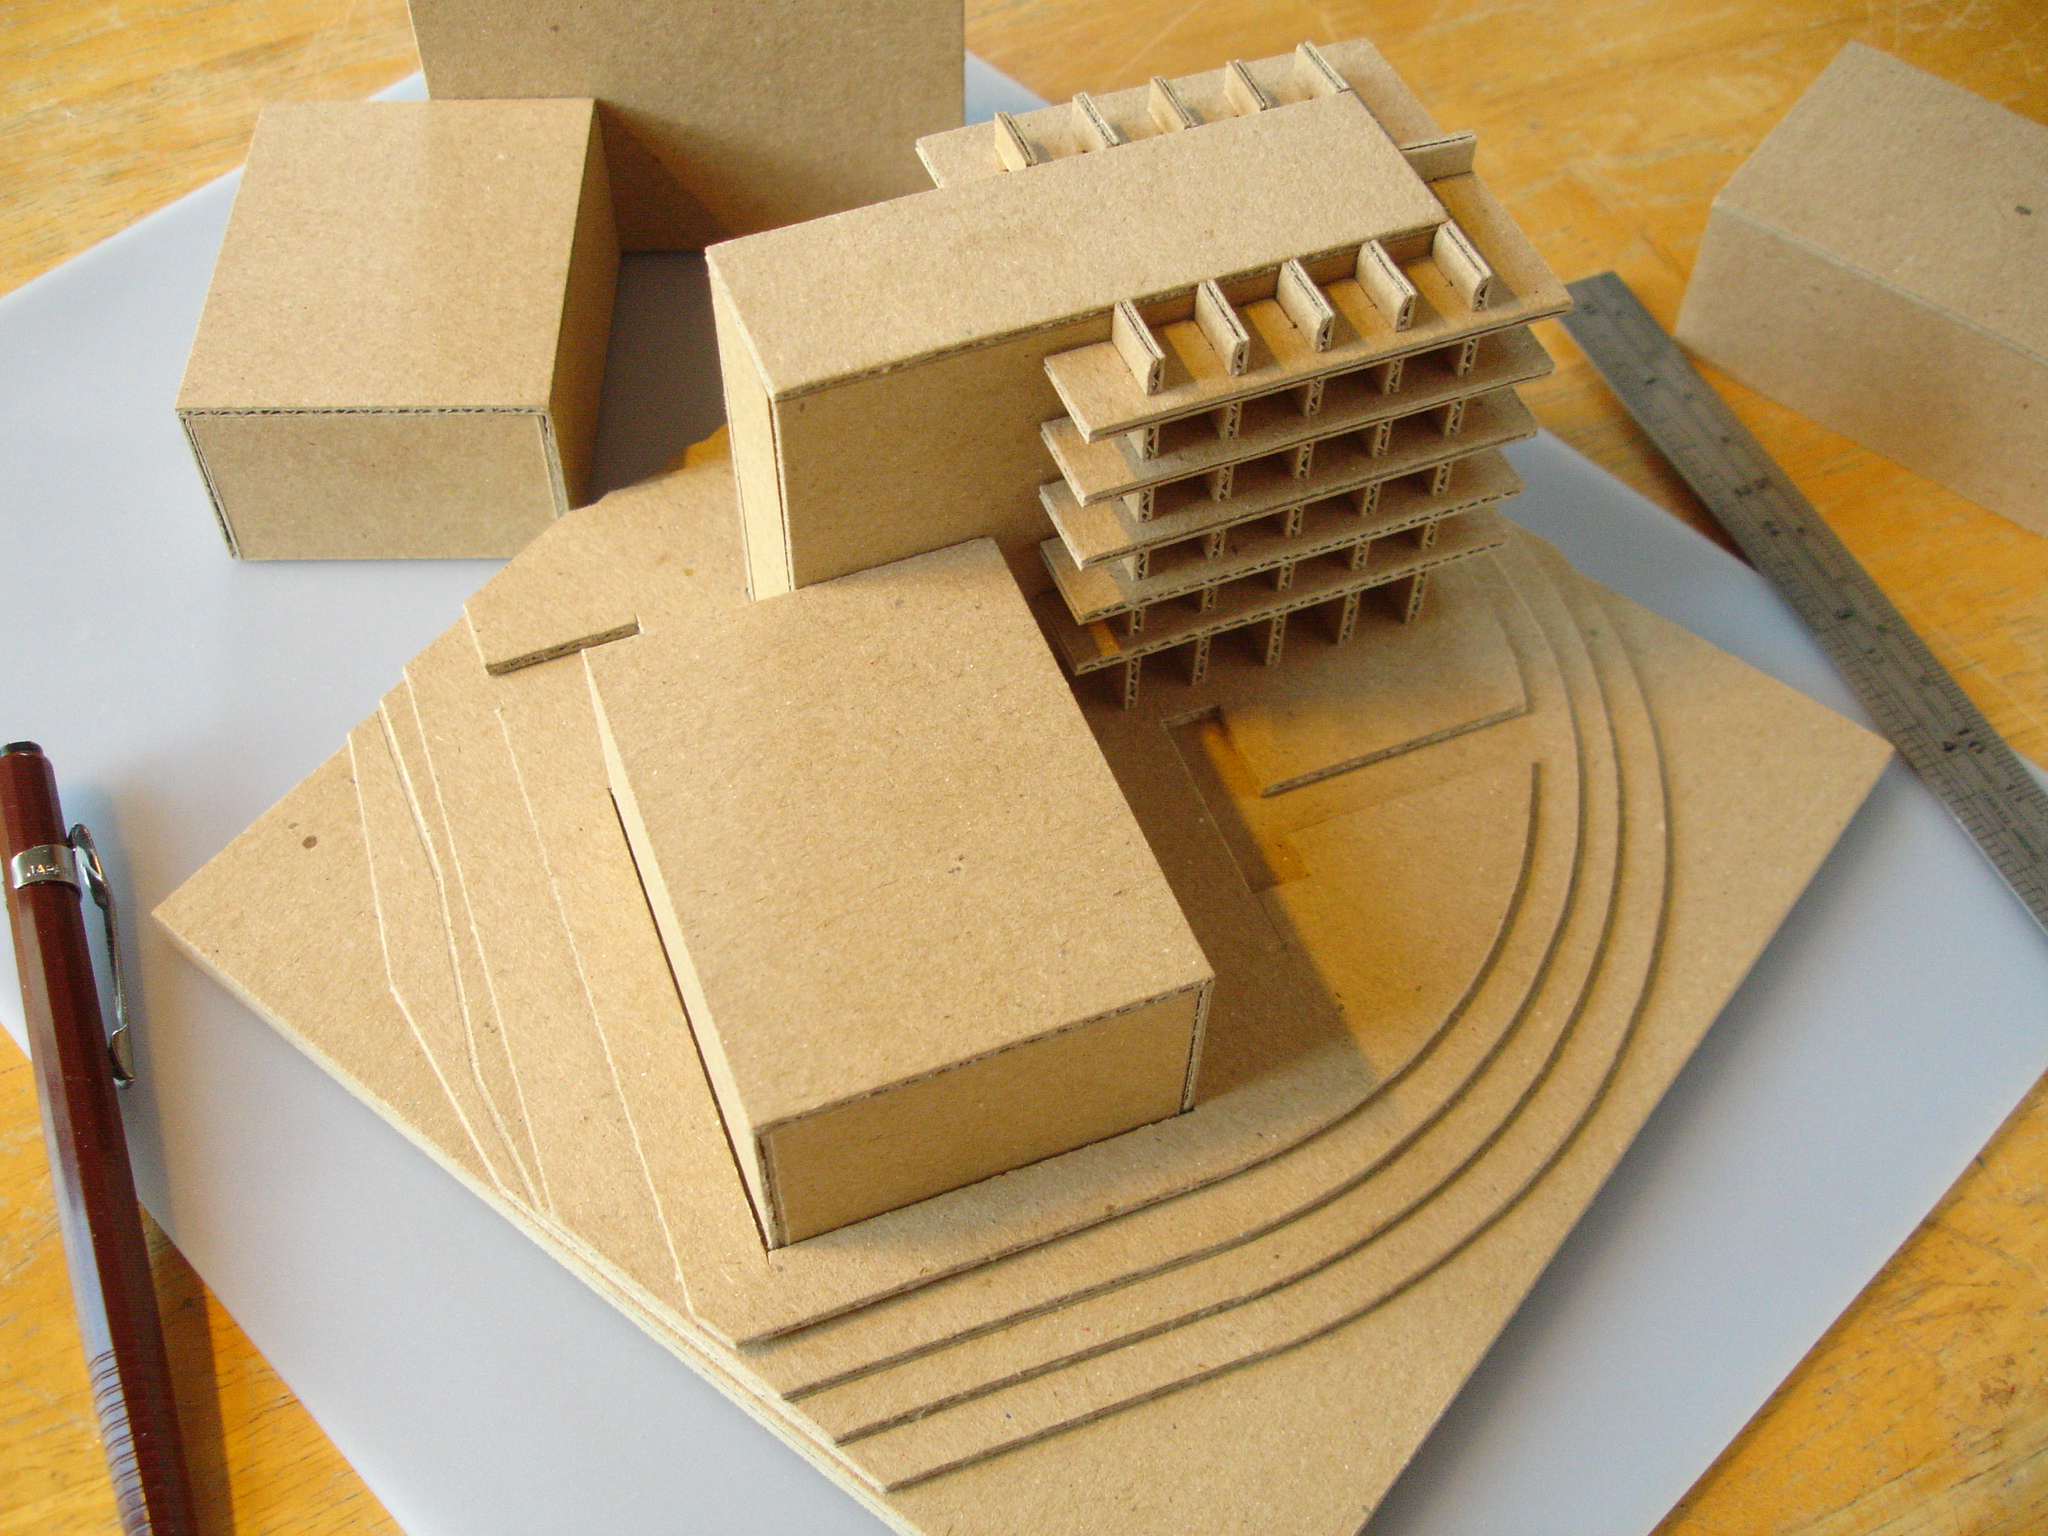 Architectural Model Making